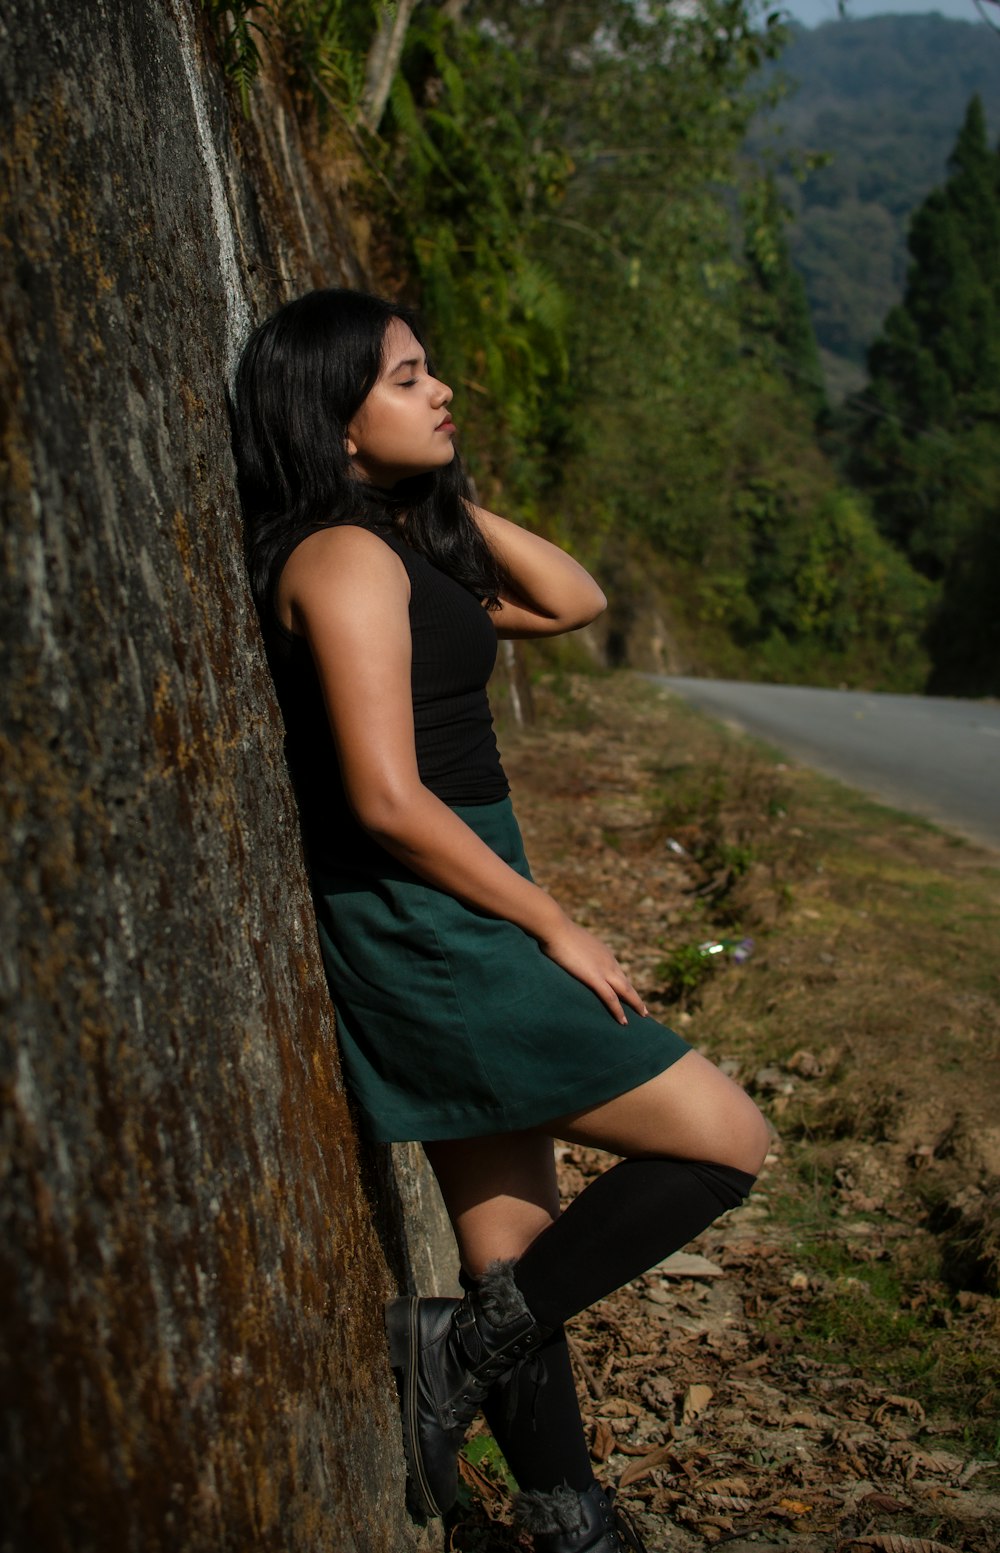 a woman leaning against a tree on the side of a road